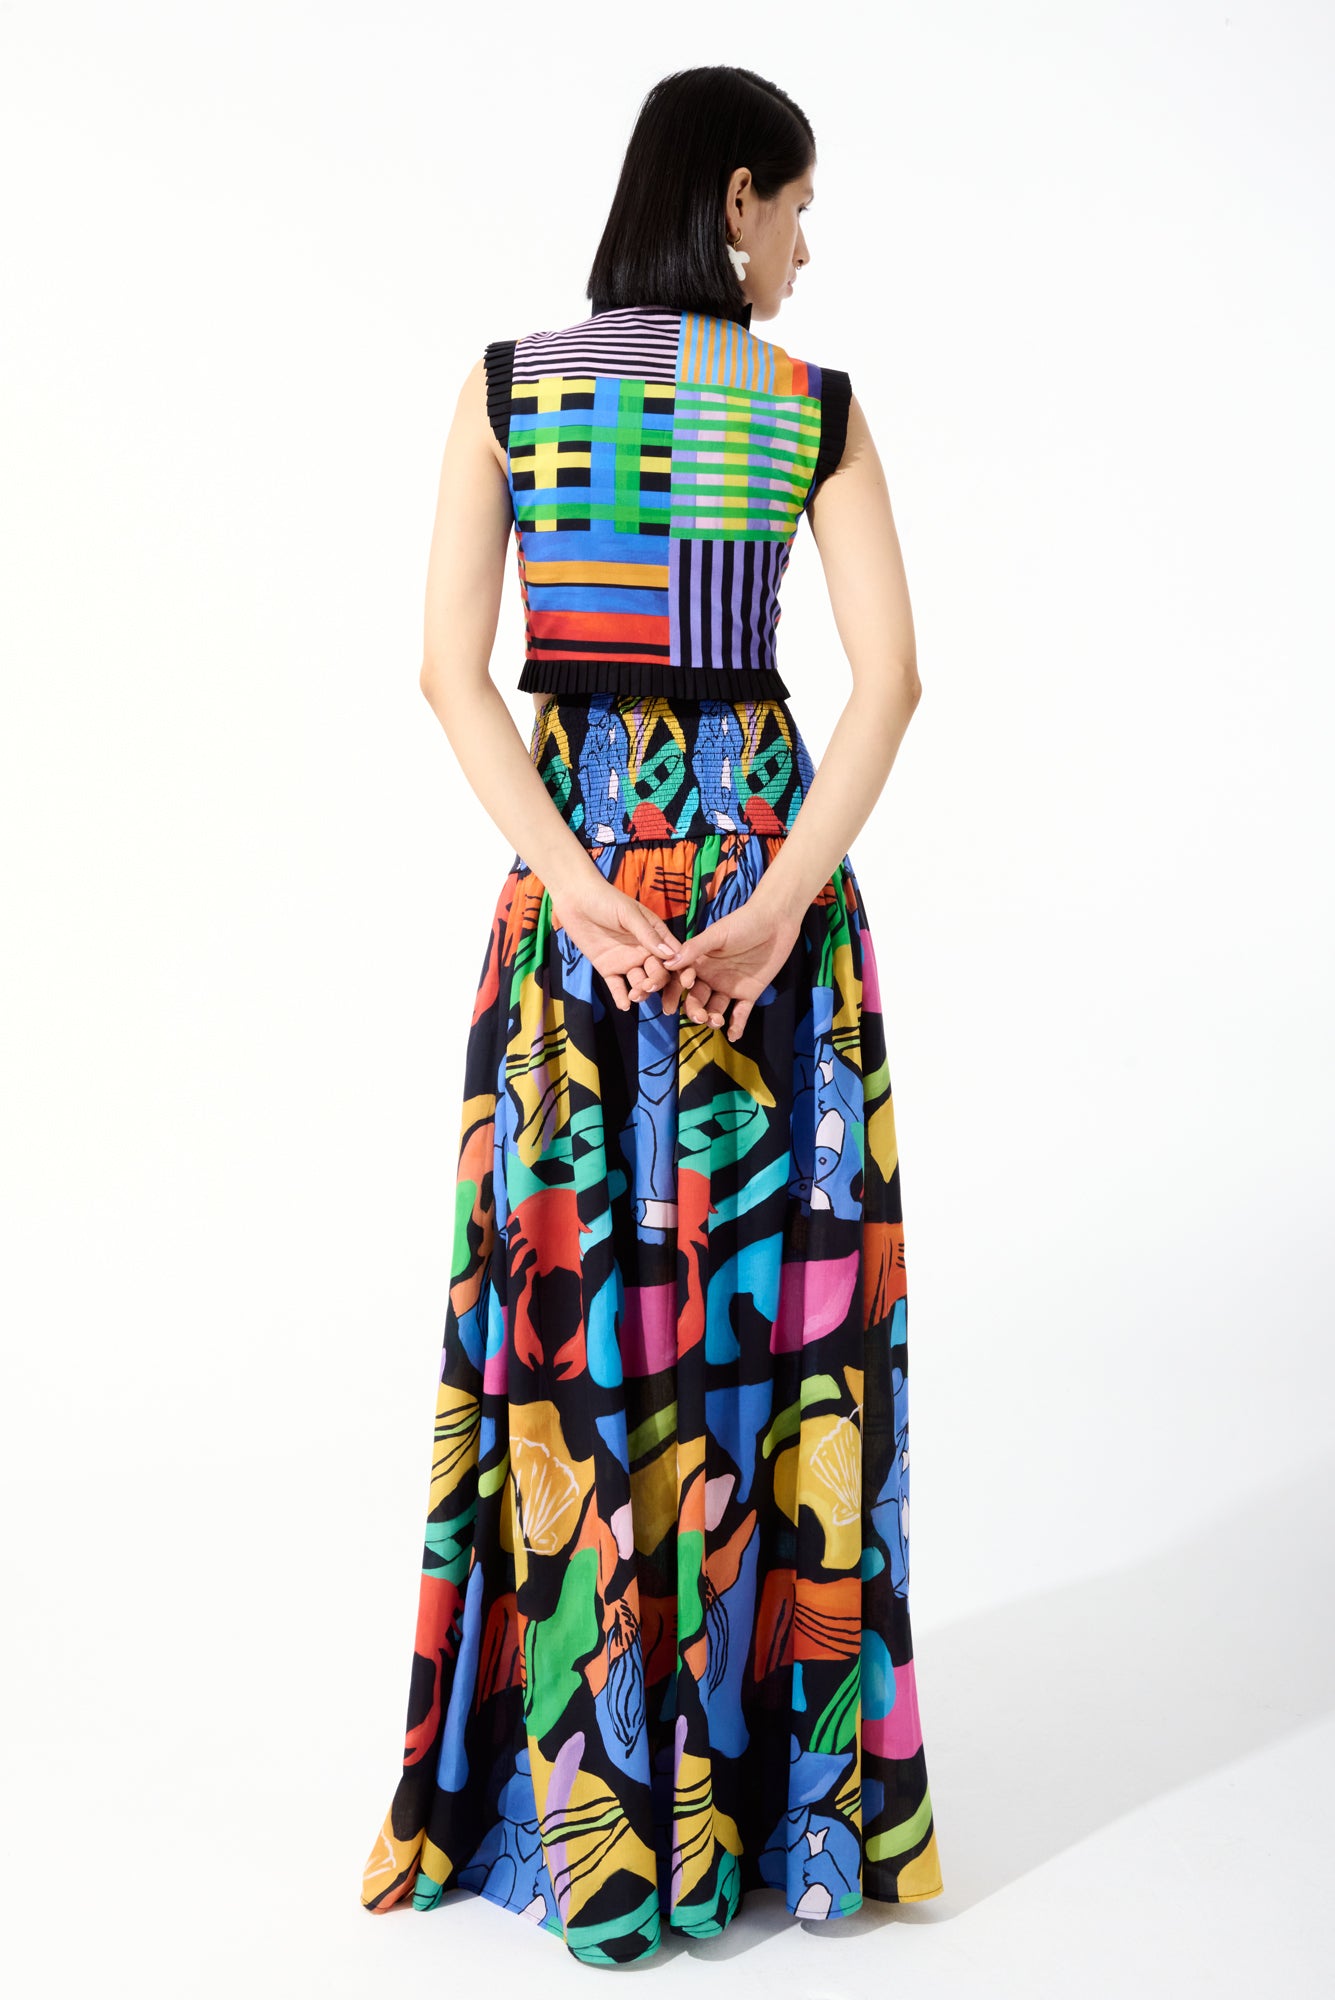 Beso Skirt in Pesca Print: A charming prairie high waisted  maxi skirt adorned with a playful multicolor print, perfect for a breezy and feminine springtime look by De Loreta.